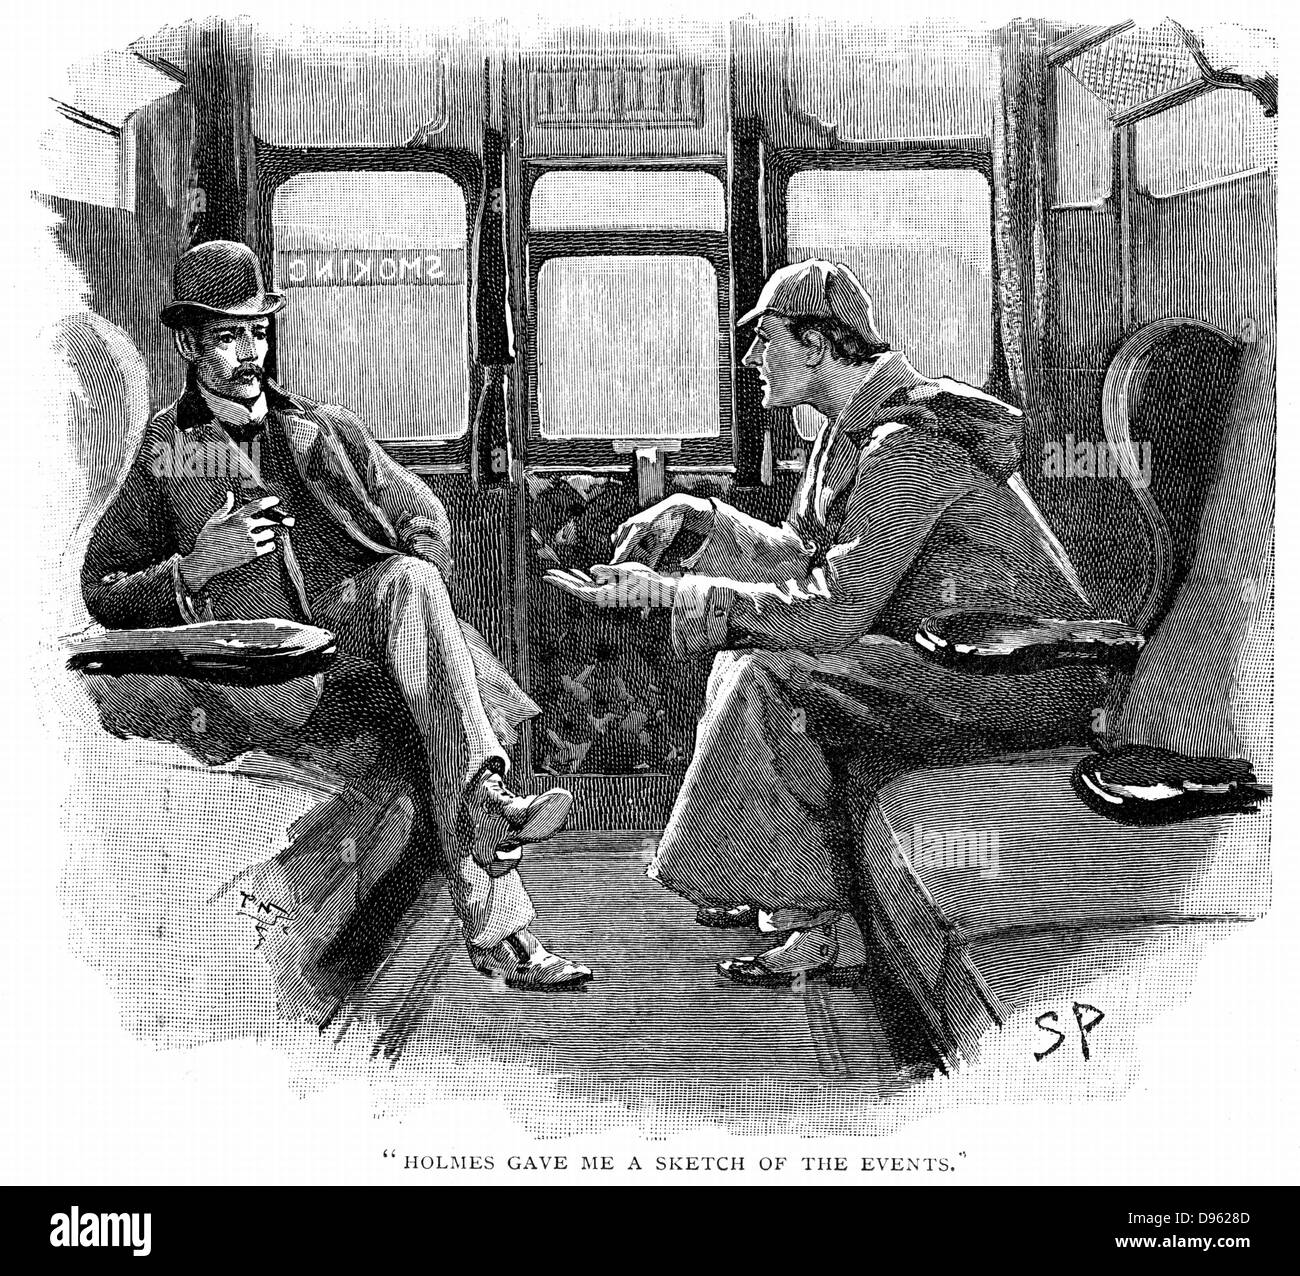 The Adventure of Silver Blaze':  'Holmes gave me a sketch of the events'.  Sherlock Holmes and Dr Watson in the railway train to Devon to investigate a murder and the disappearance of a famous racehorse.  Arthur Conan Doyle's story published in 'The Strand Magazine', London, 1892.  Illustration by Sydney E Paget, the first artist to create an image of Holmes. Stock Photo